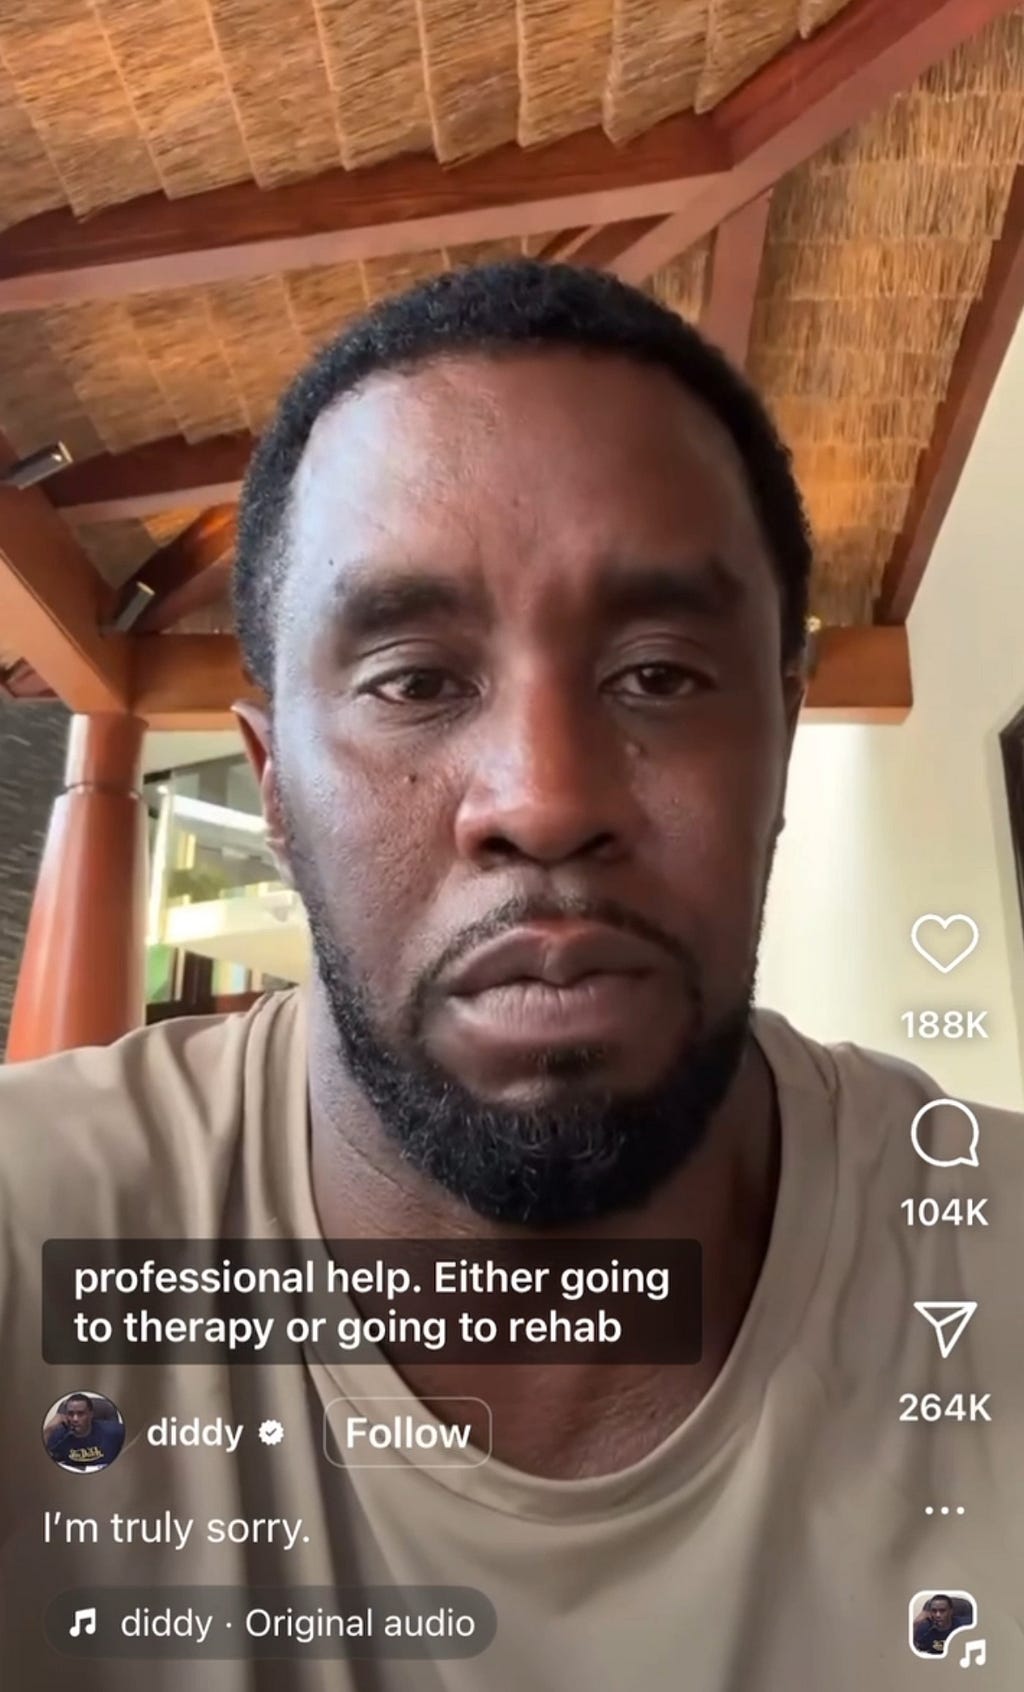 A screenshot of Diddy’s fake “apology” video posted on his instagram. He has an unsmiling face, is wearing a tan t-shirt, and is sitting under a thatched roof in some swanky place. The caption reads, “I’m truly sorry,” but he accidentally left off “for being caught.” The closed captioning that appears reads, “professional help. Either going to therapy or going to rehab.” There are 188K likes (who *are* these people?), 104K comments (many of which are not abuse informed), and 264K shares.